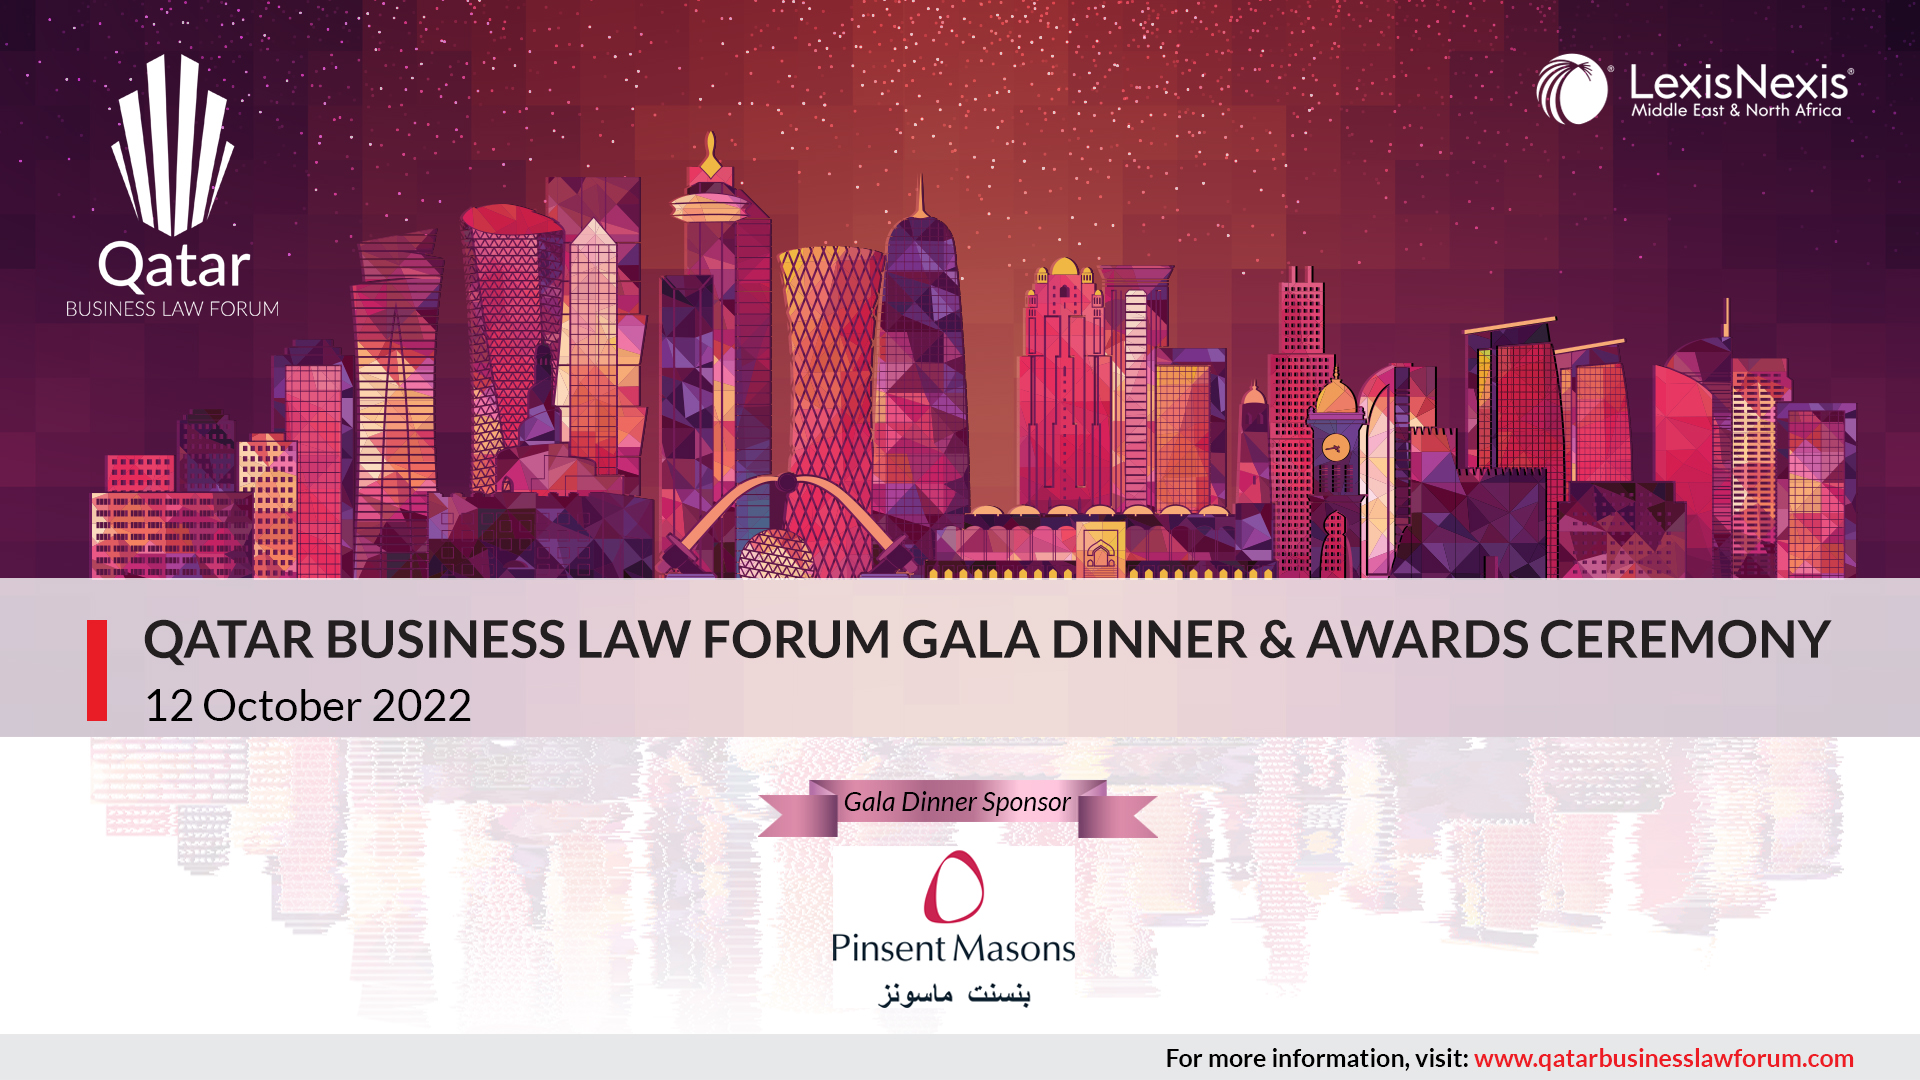 The shortlists for the Qatar Business Law Forum Gala Dinner & Awards Ceremony 2022 – 7th Edition are in!